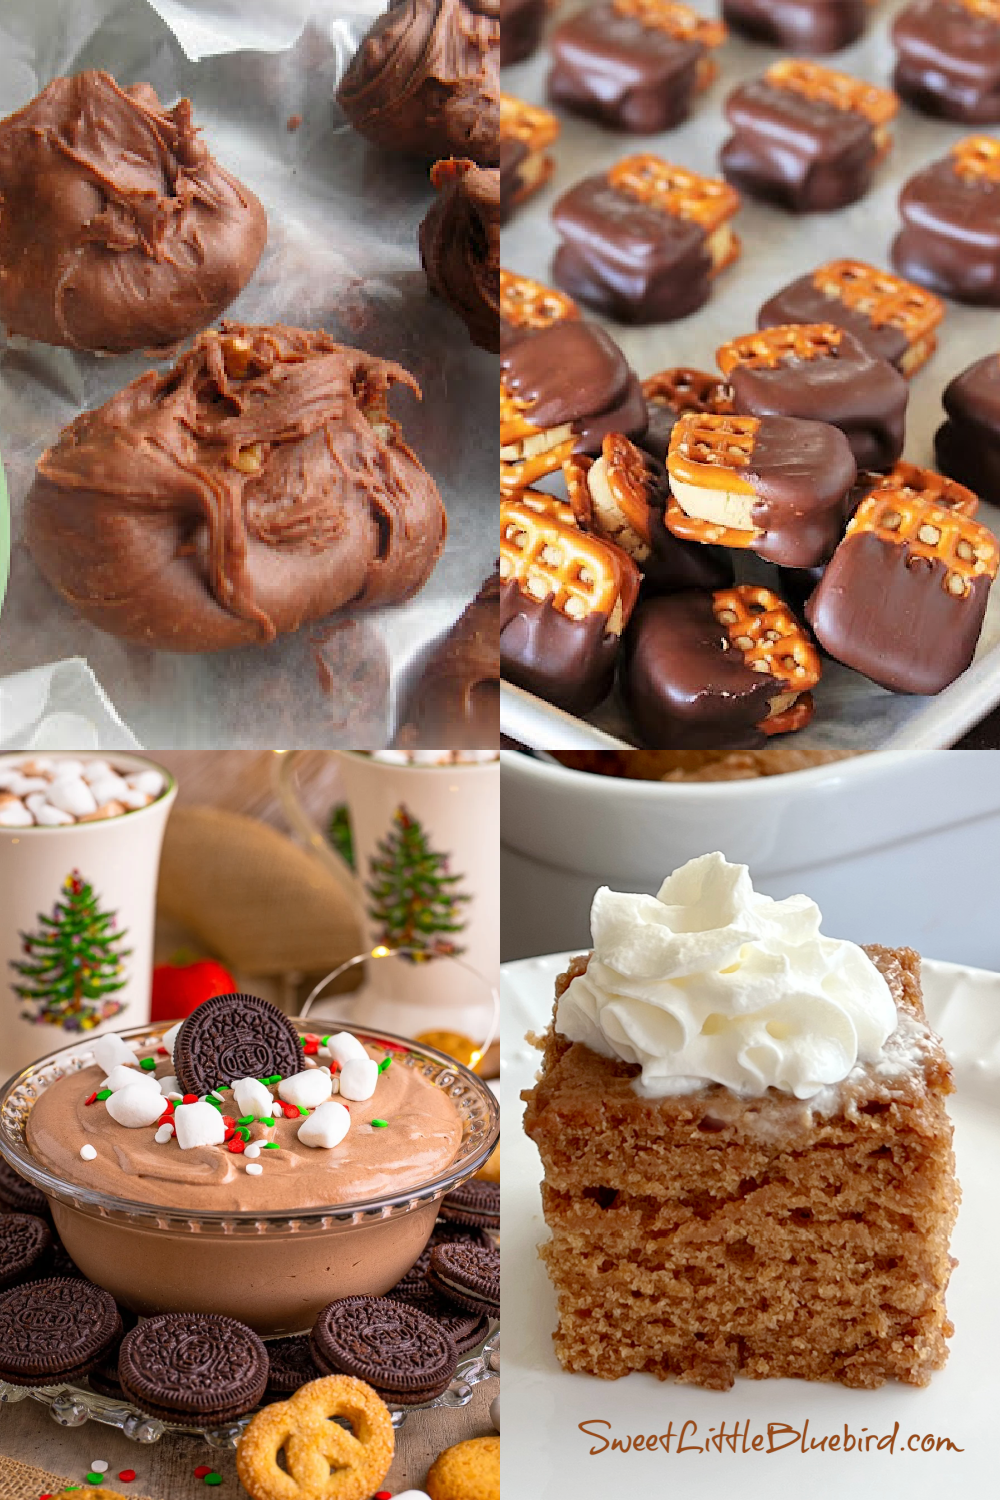 This is a 4 photo collage showing a picture of each recipe featured this week - Millionaire Fudge, Peanut Butter Buckeye Pretzels, Hot Chocolate Dip and Gingerbread Crazy Cake.